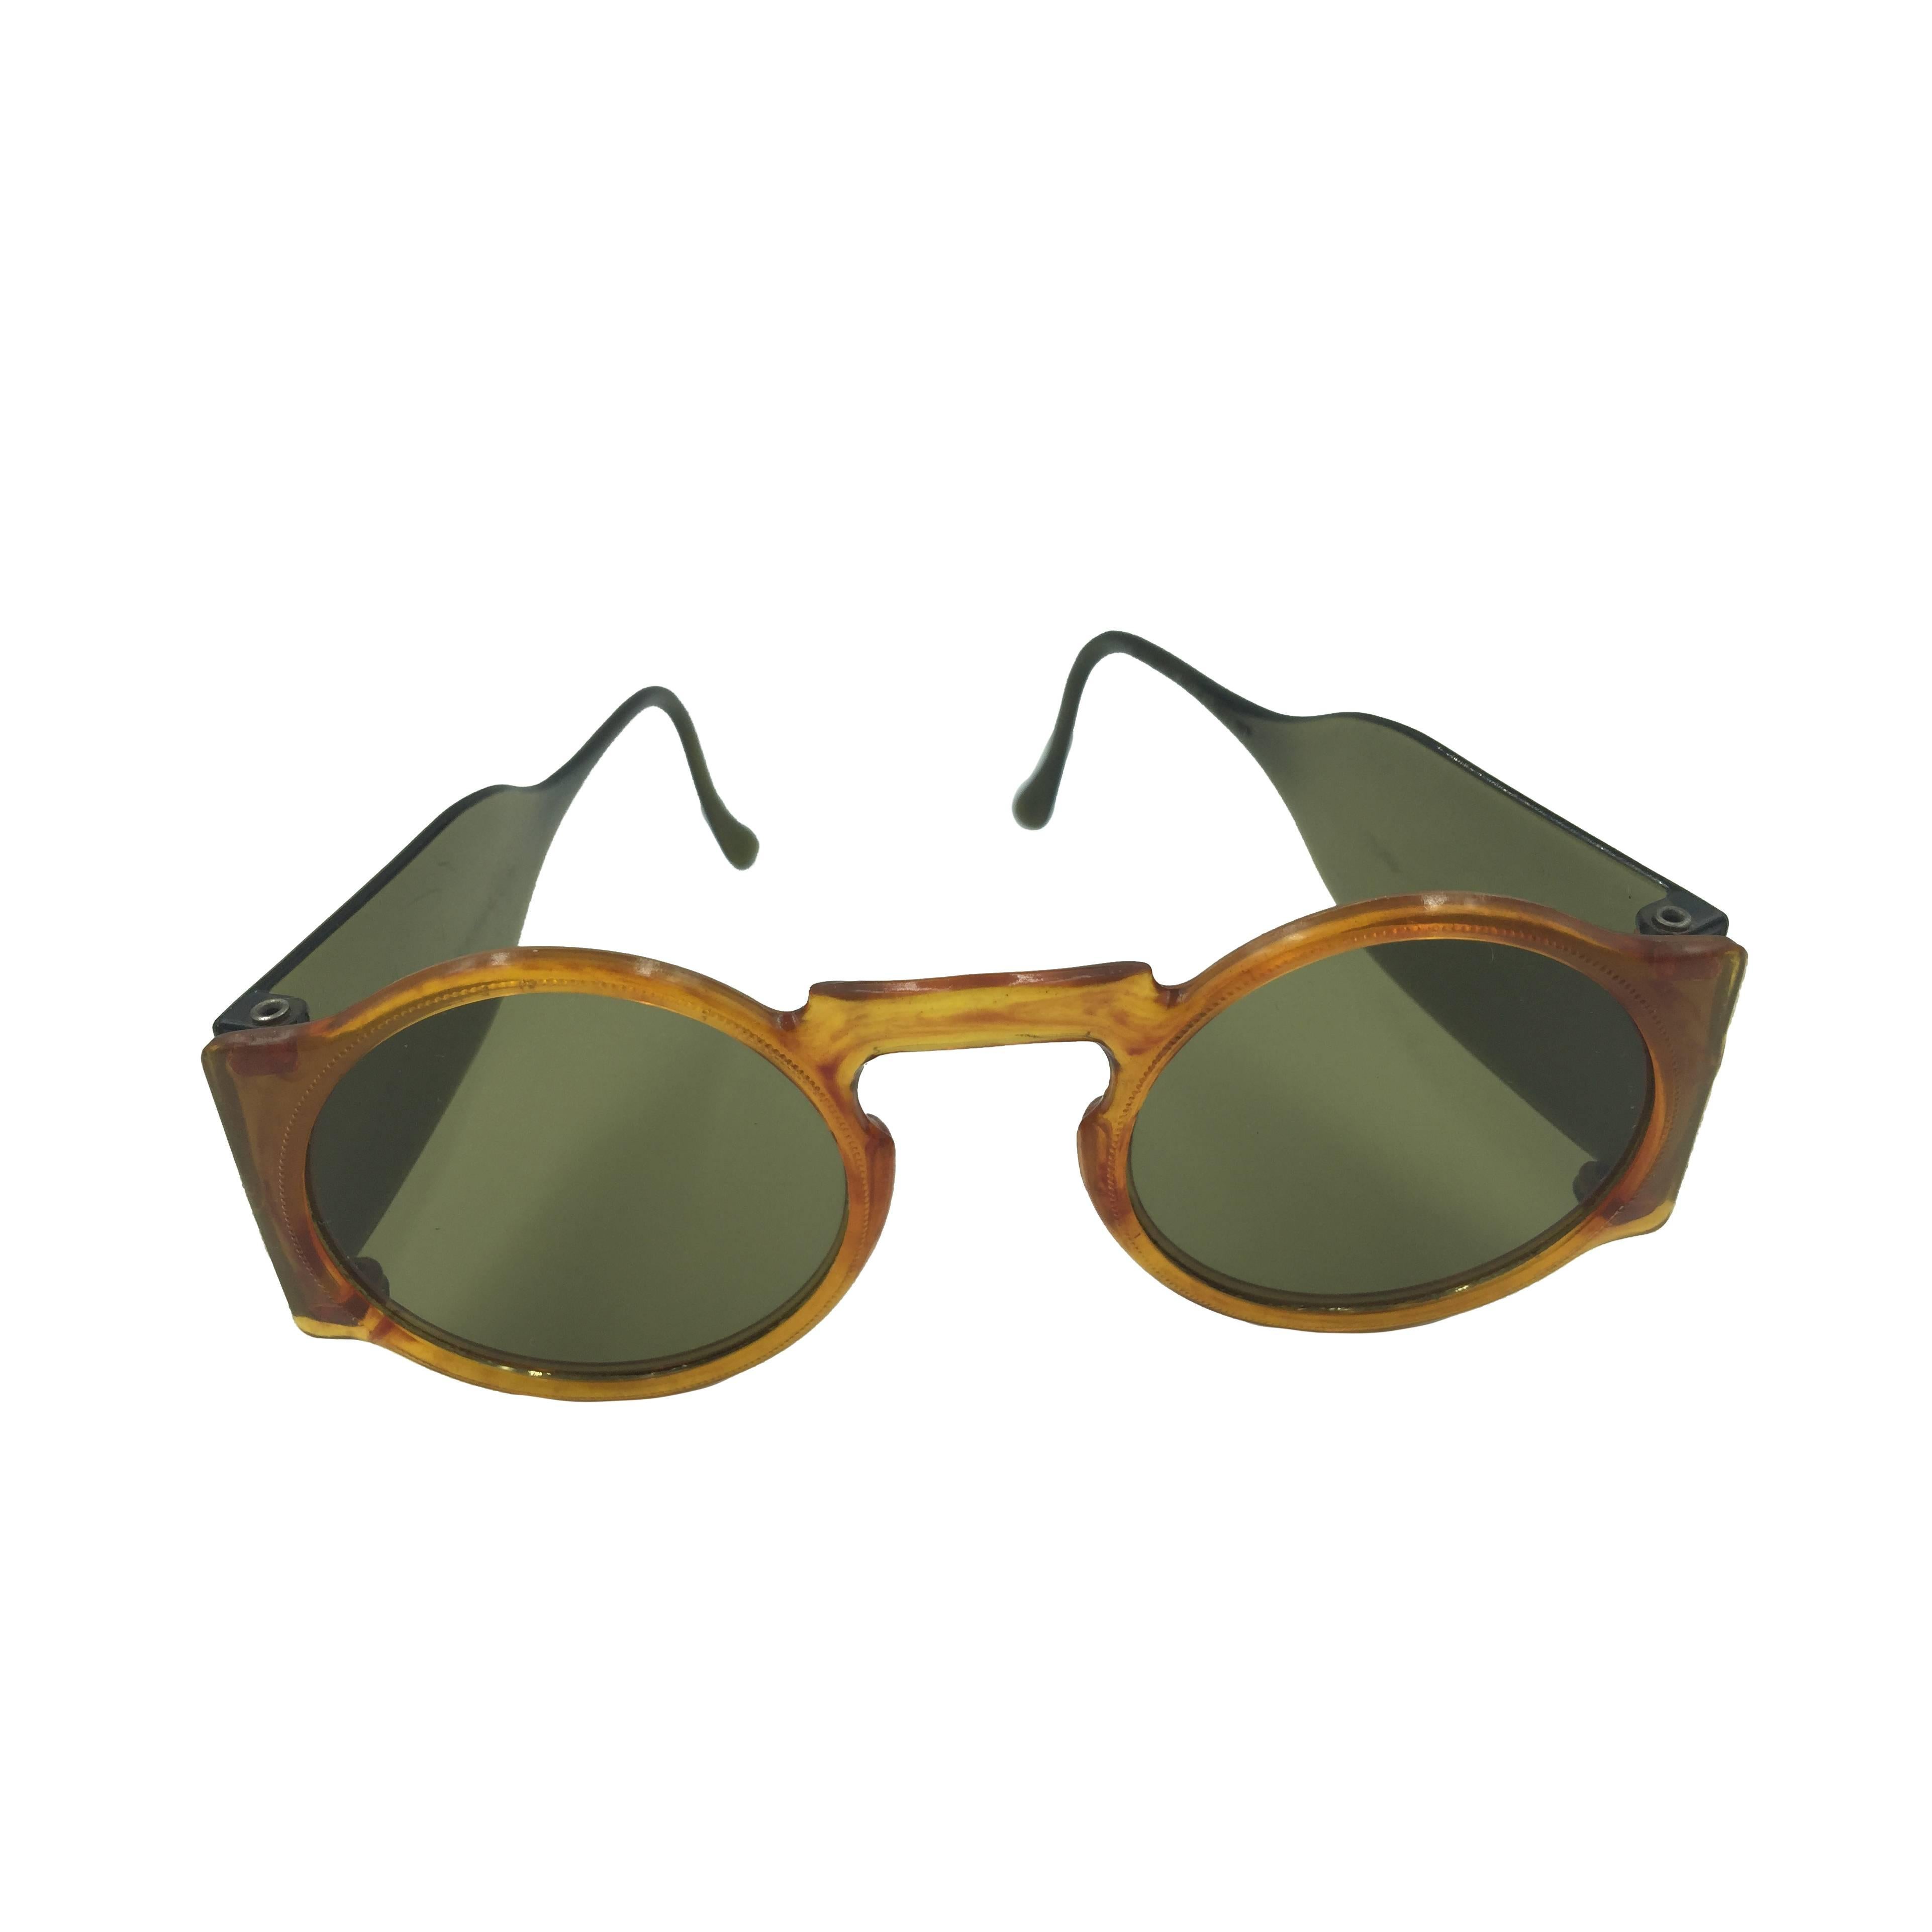 Rare 1930's Faux Tortoise Sunglasses with Side Shields.